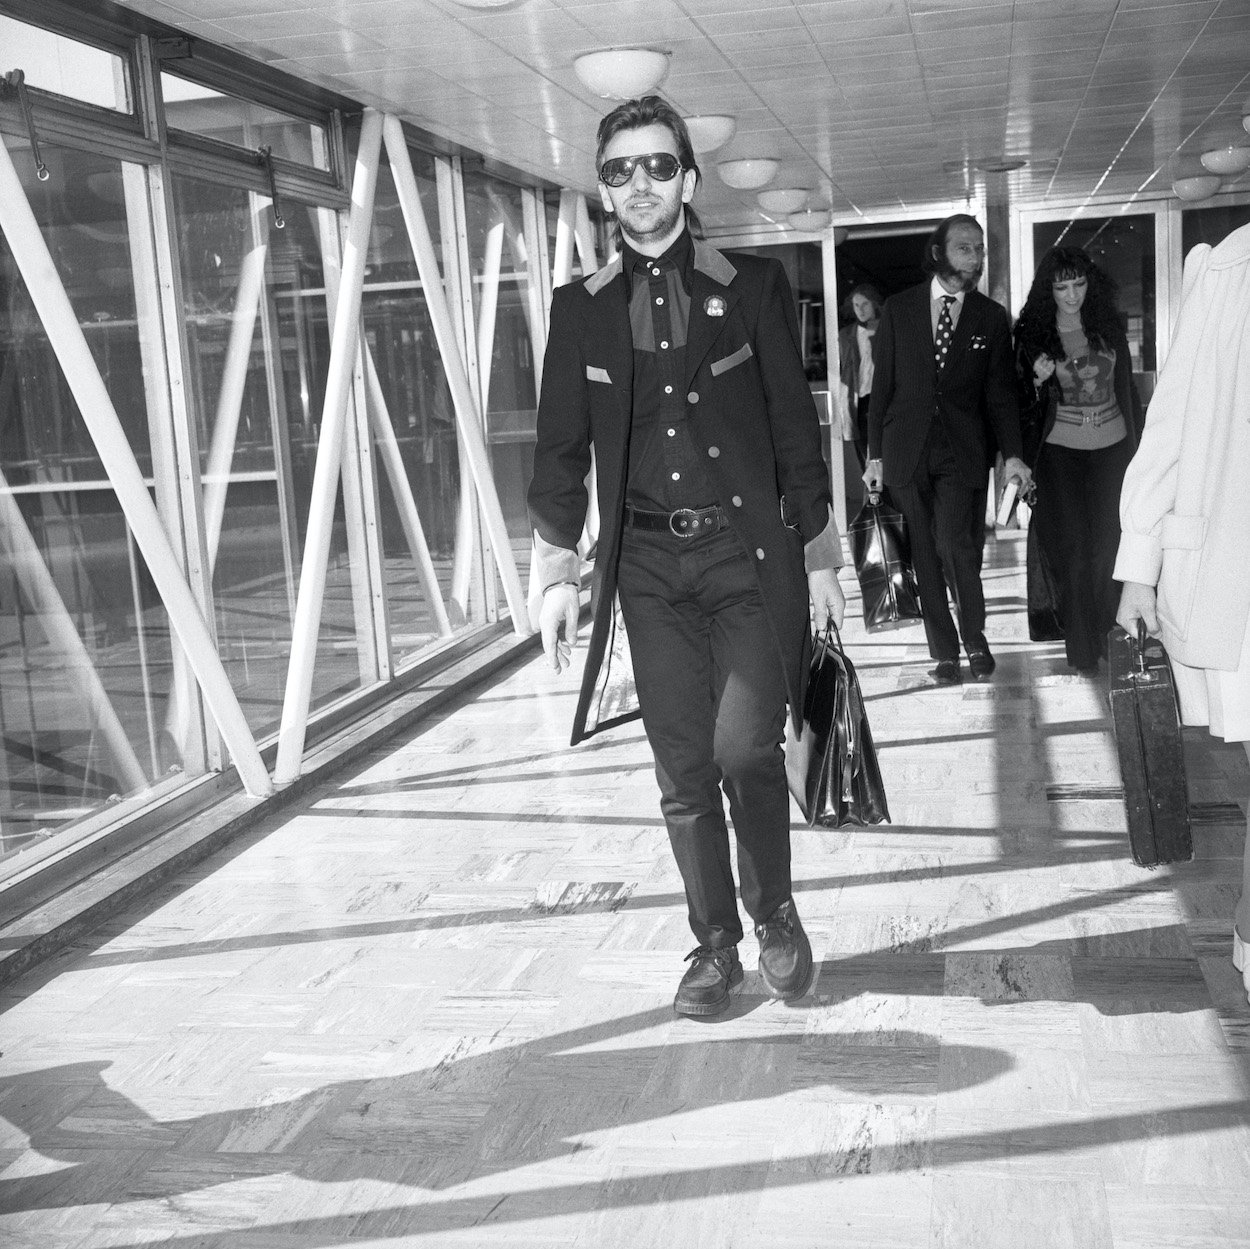 Ringo Starr carries a bag while walking through Heathrow Airport in London in 1972.